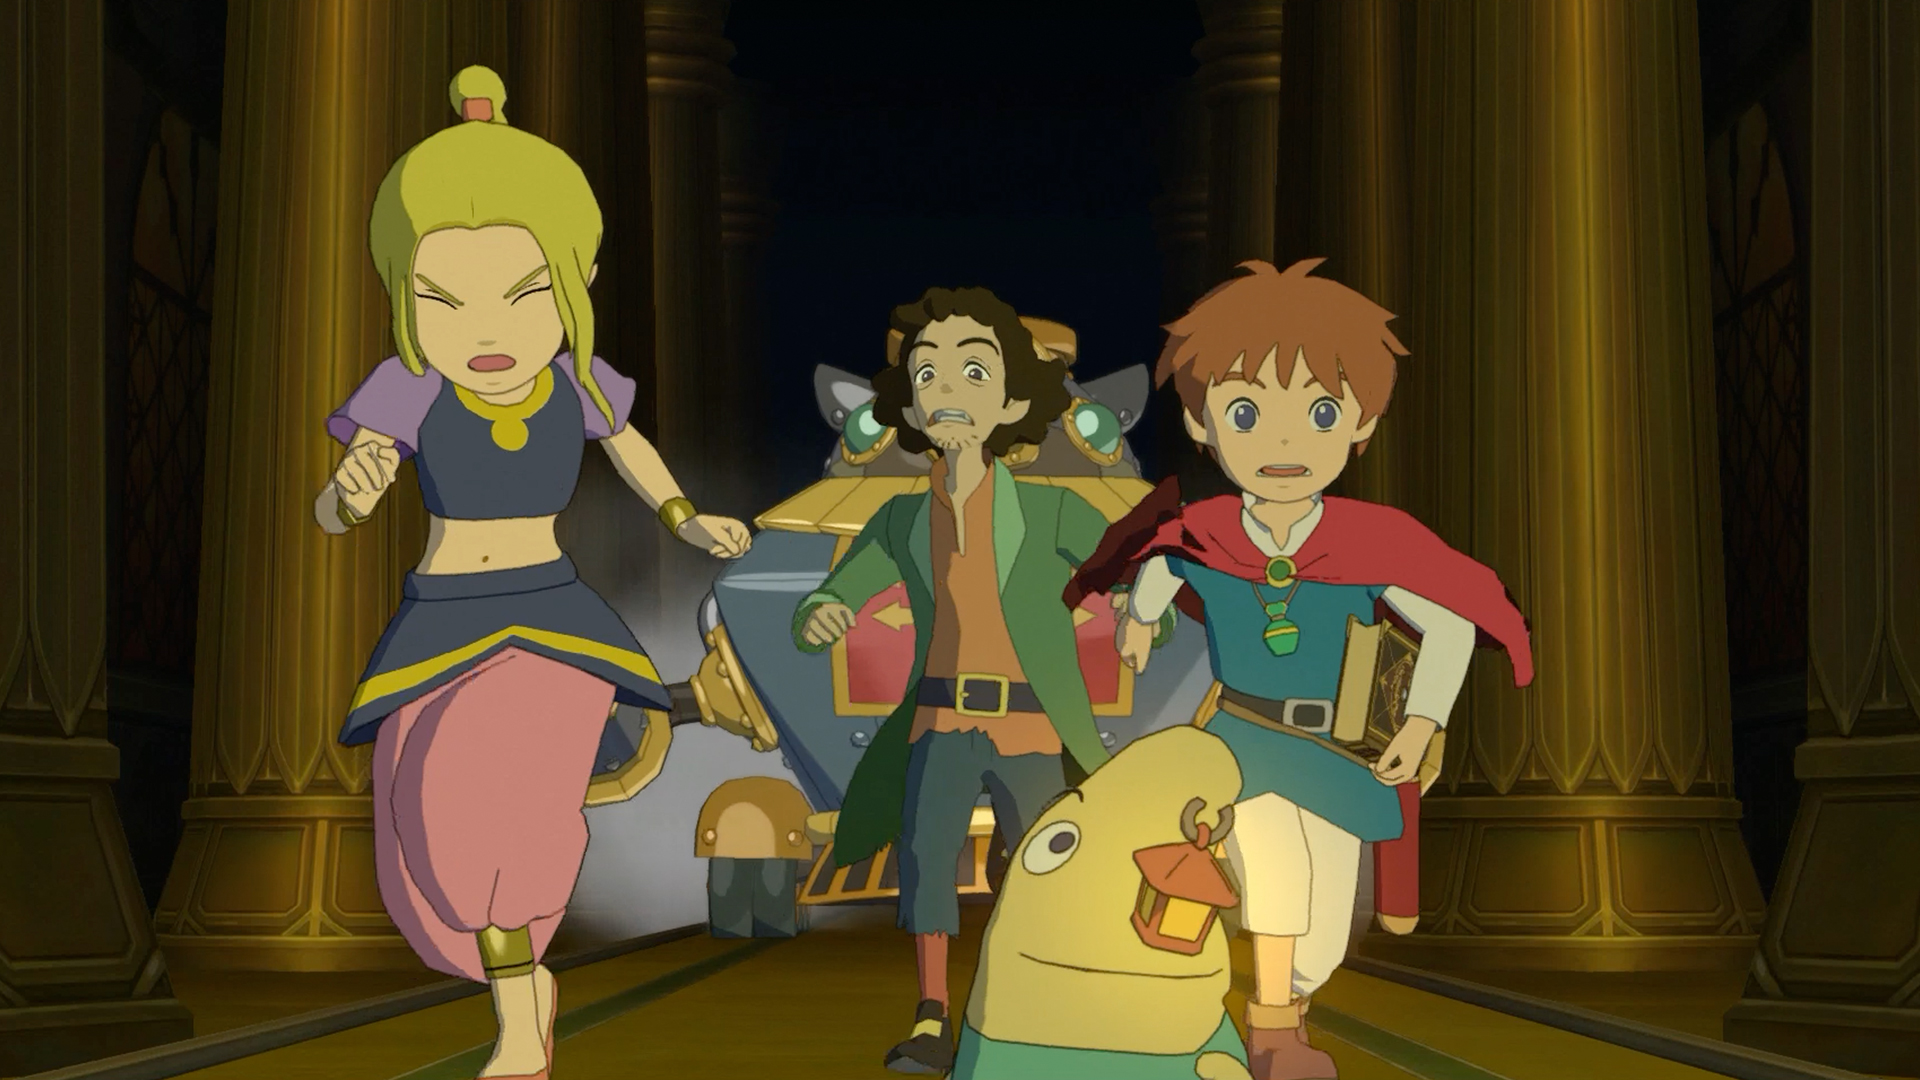 Ni No Kuni: Wrath of the White Witch Remastered - PlayStation 4 - image 4 of 11